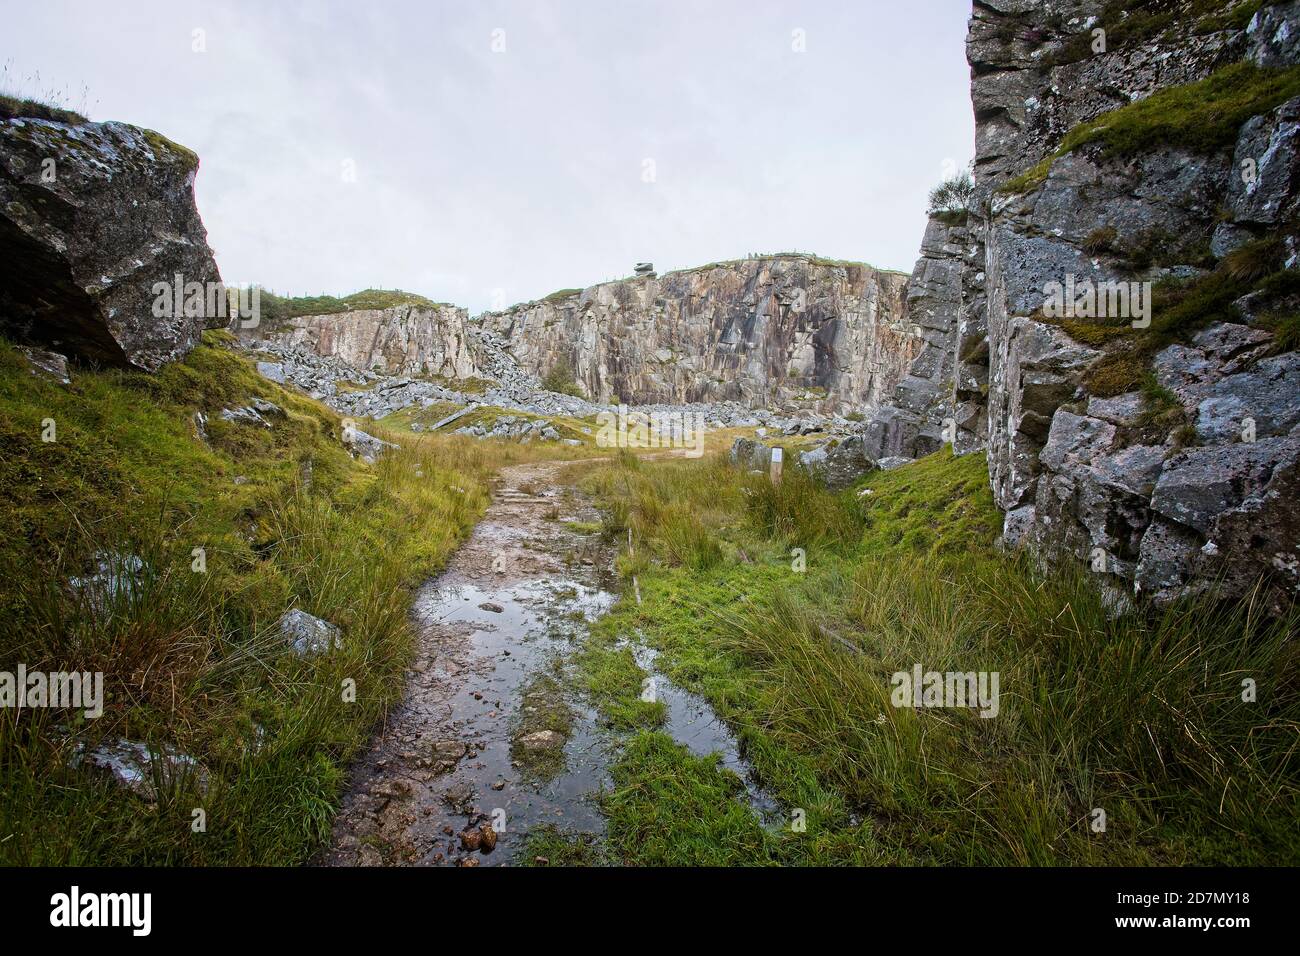 Entrance to the Cheesewring Quarry on the eastern edge of Bodmin Moor near Minions, Cornwall, England, UK. Stock Photo